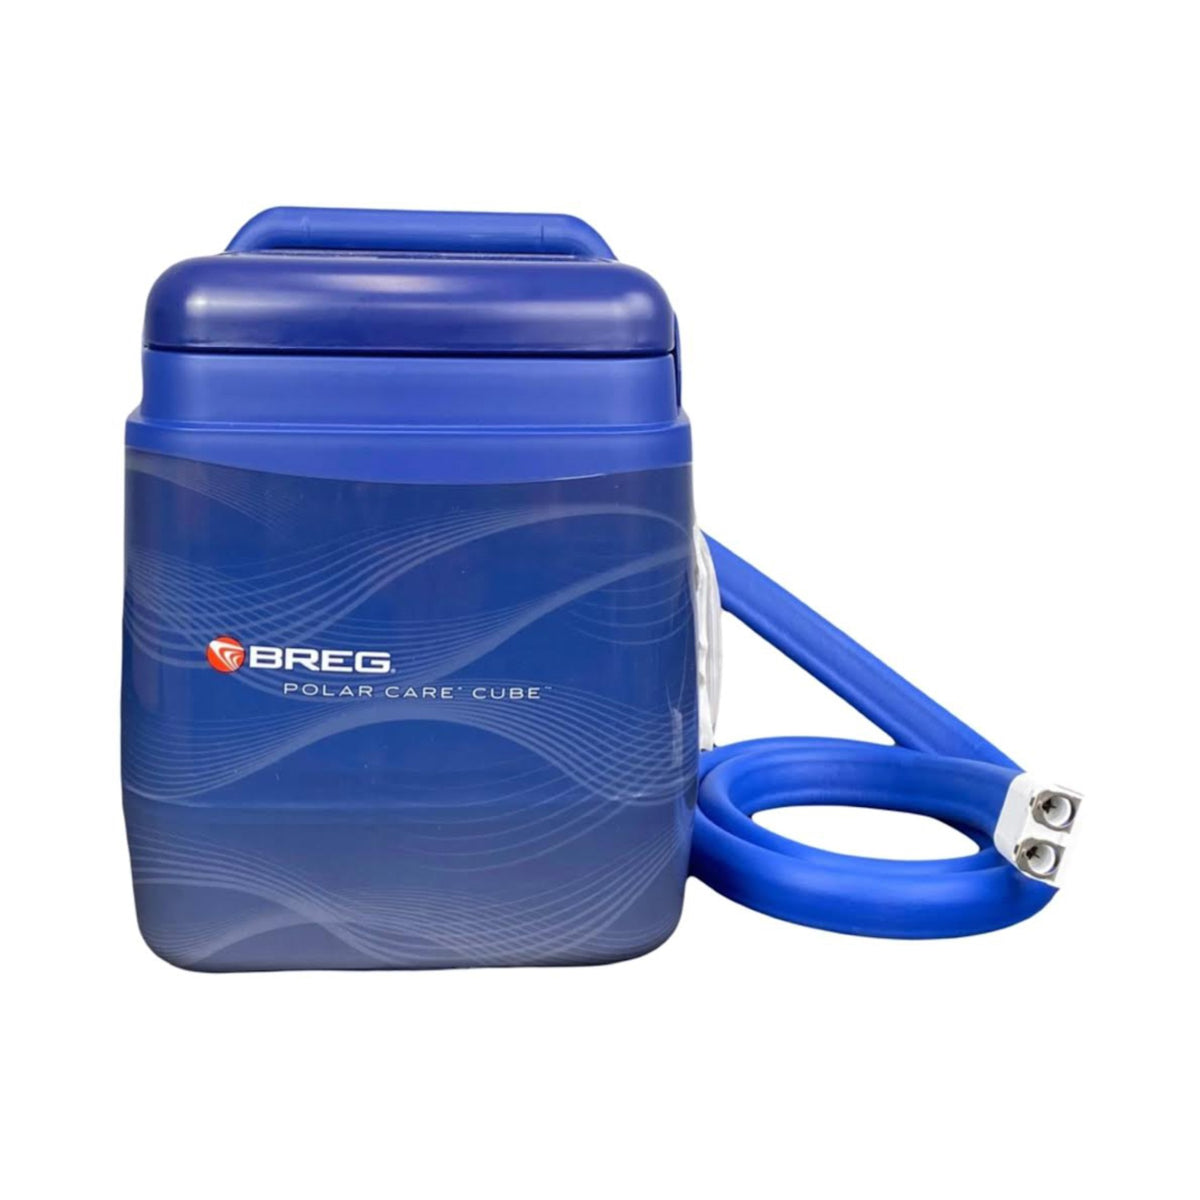 Breg Polar Care Cube System - Cooler Only